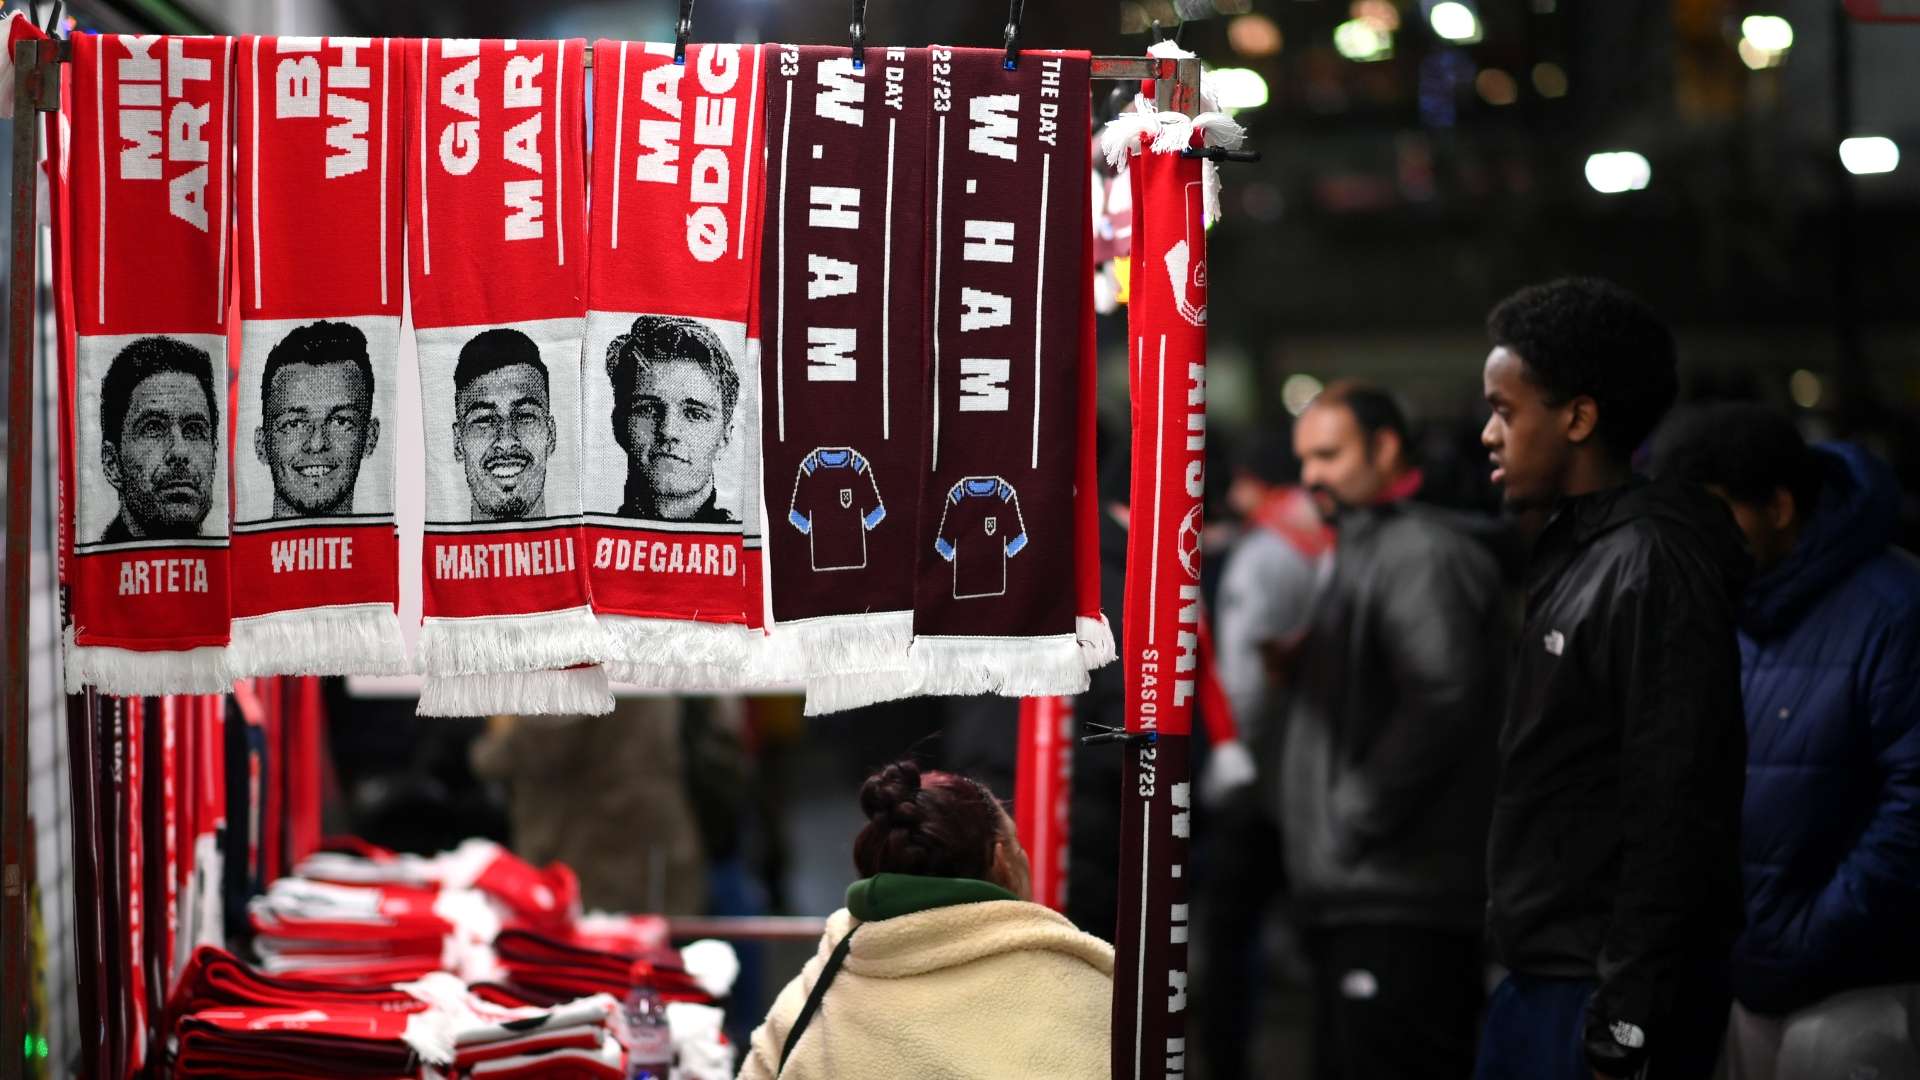  Match day scarves are seen being sold outside the stadium prior to the Premier League match between Arsenal FC and West Ham United.